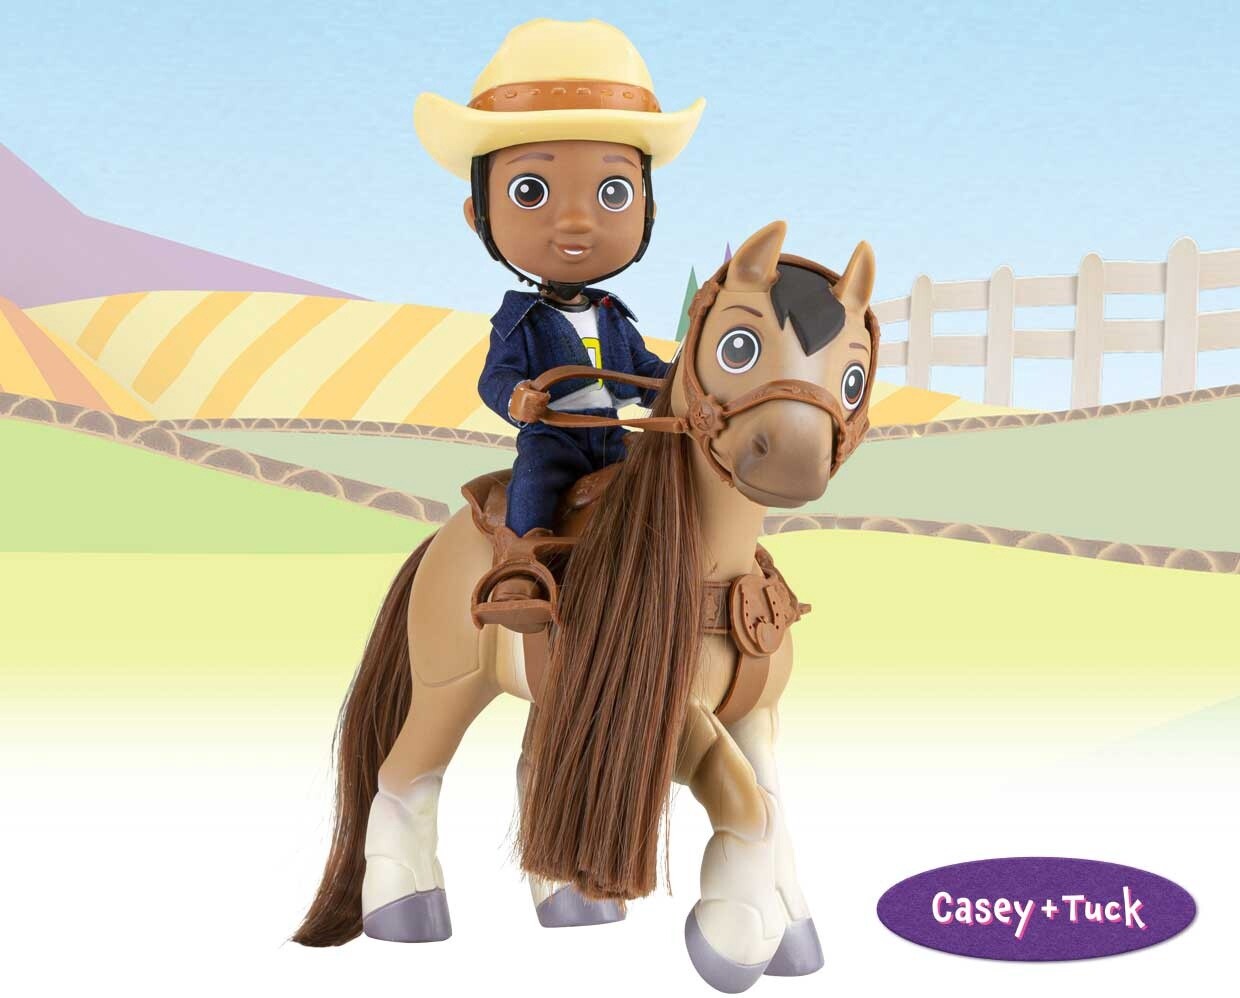 Breyer Piper's Pony Tales (Casey and Tuck)